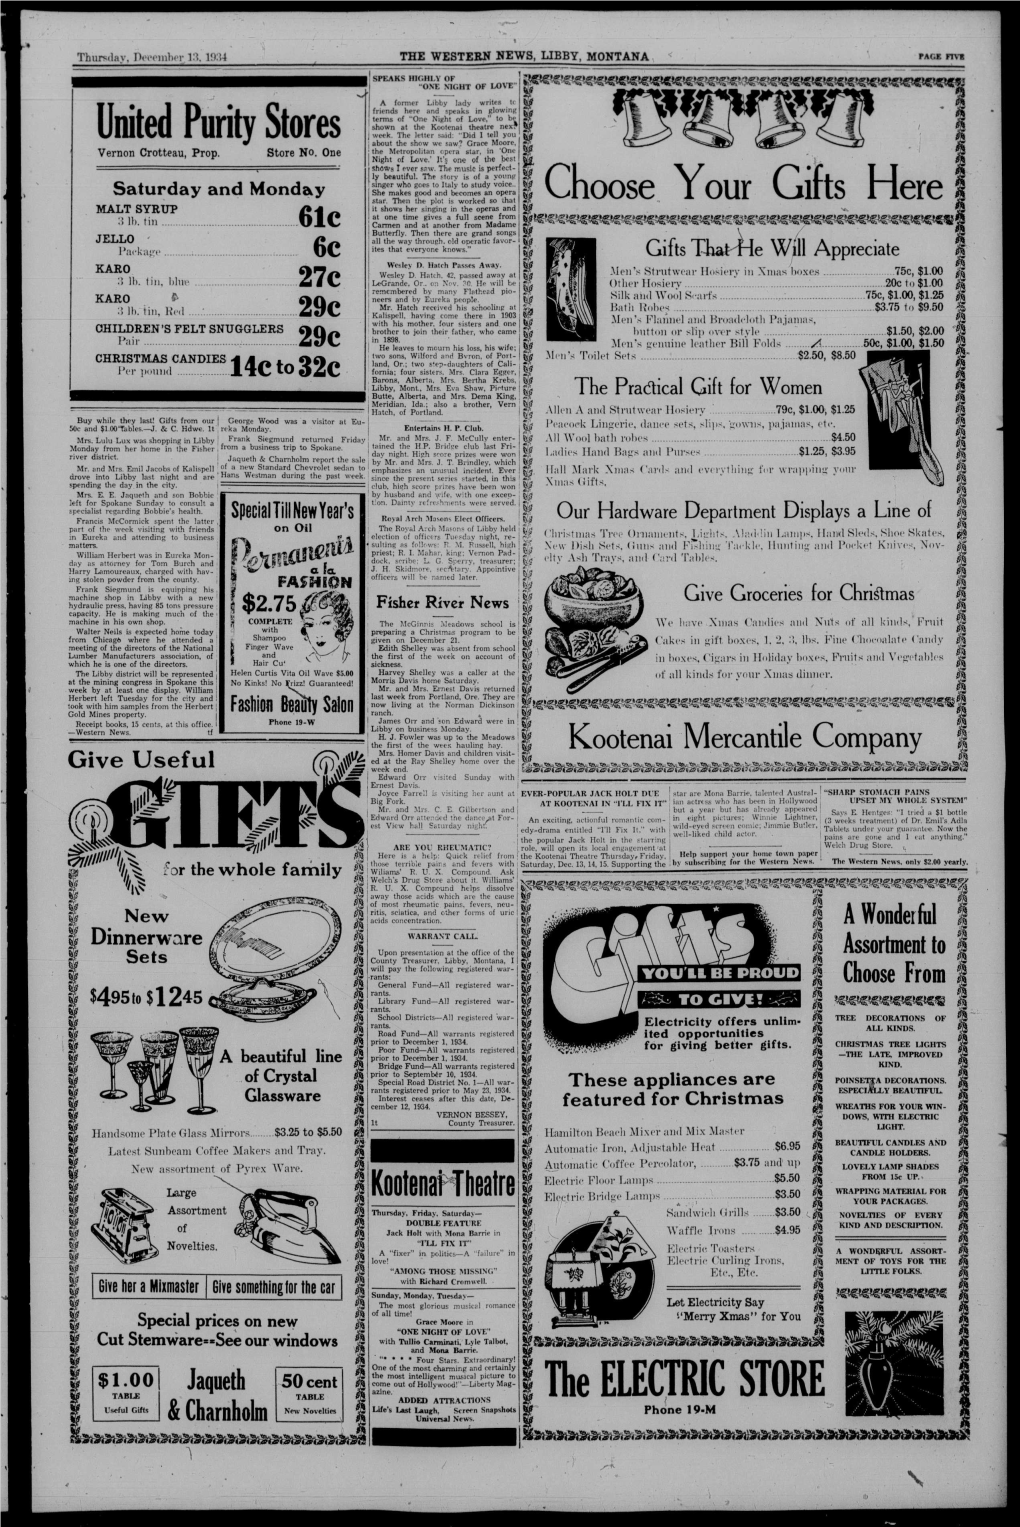 The Western News (Libby, Mont.), 1934-12-13, [P PAGE FIVE]